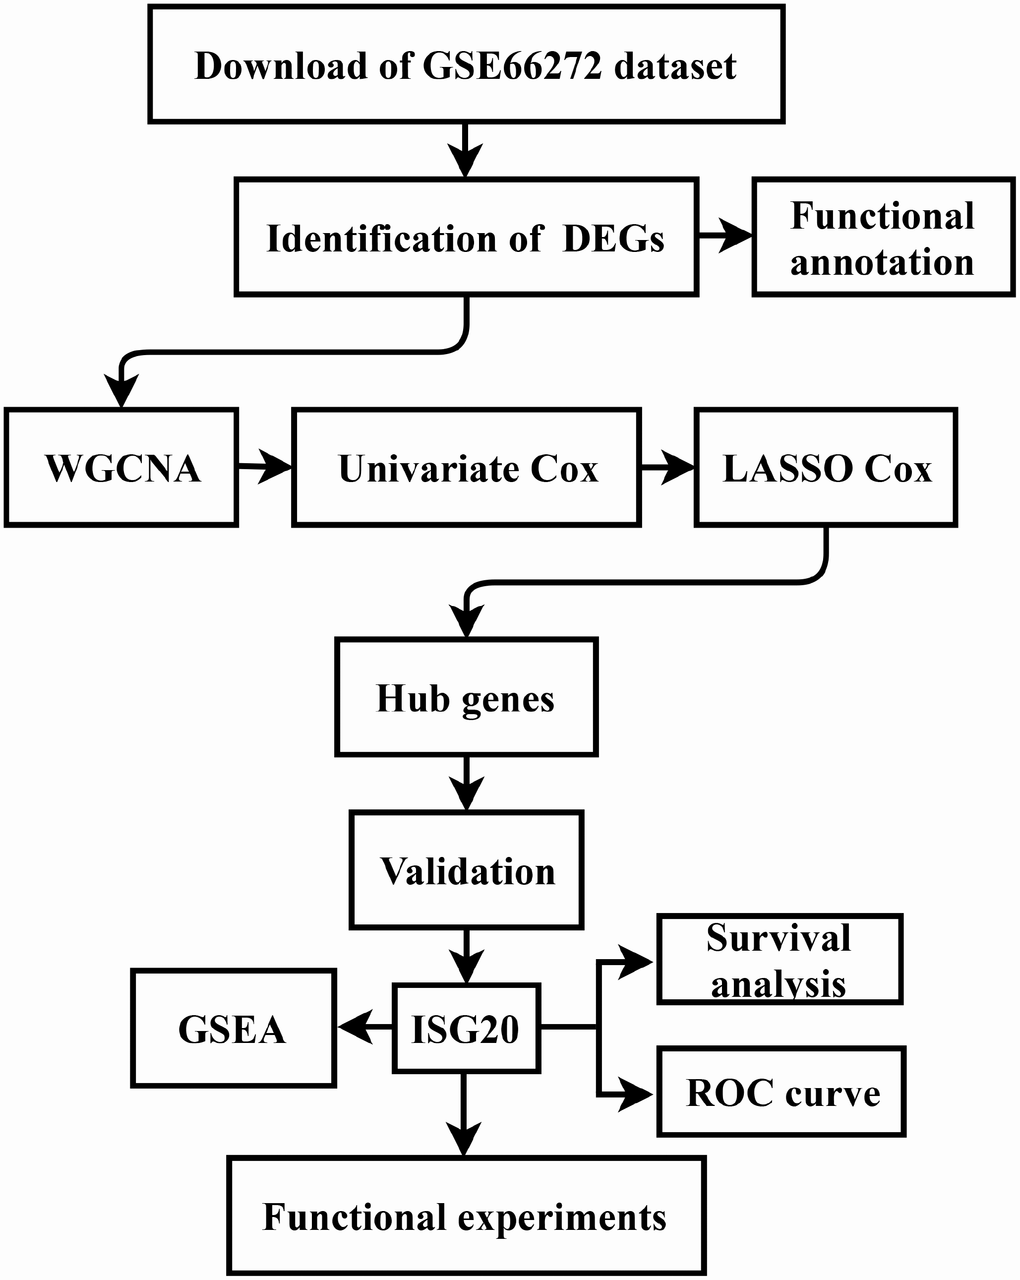 Flow diagram of the study. Data collection and analysis were exhibited in the flow diagram. DEGs: differentially expressed genes; WGCNA: weighted gene co-expression network analysis; LASSO: least absolute shrinkage and selection operator; GSEA: gene set enrichment analysis; ROC: receiver operator characteristic.